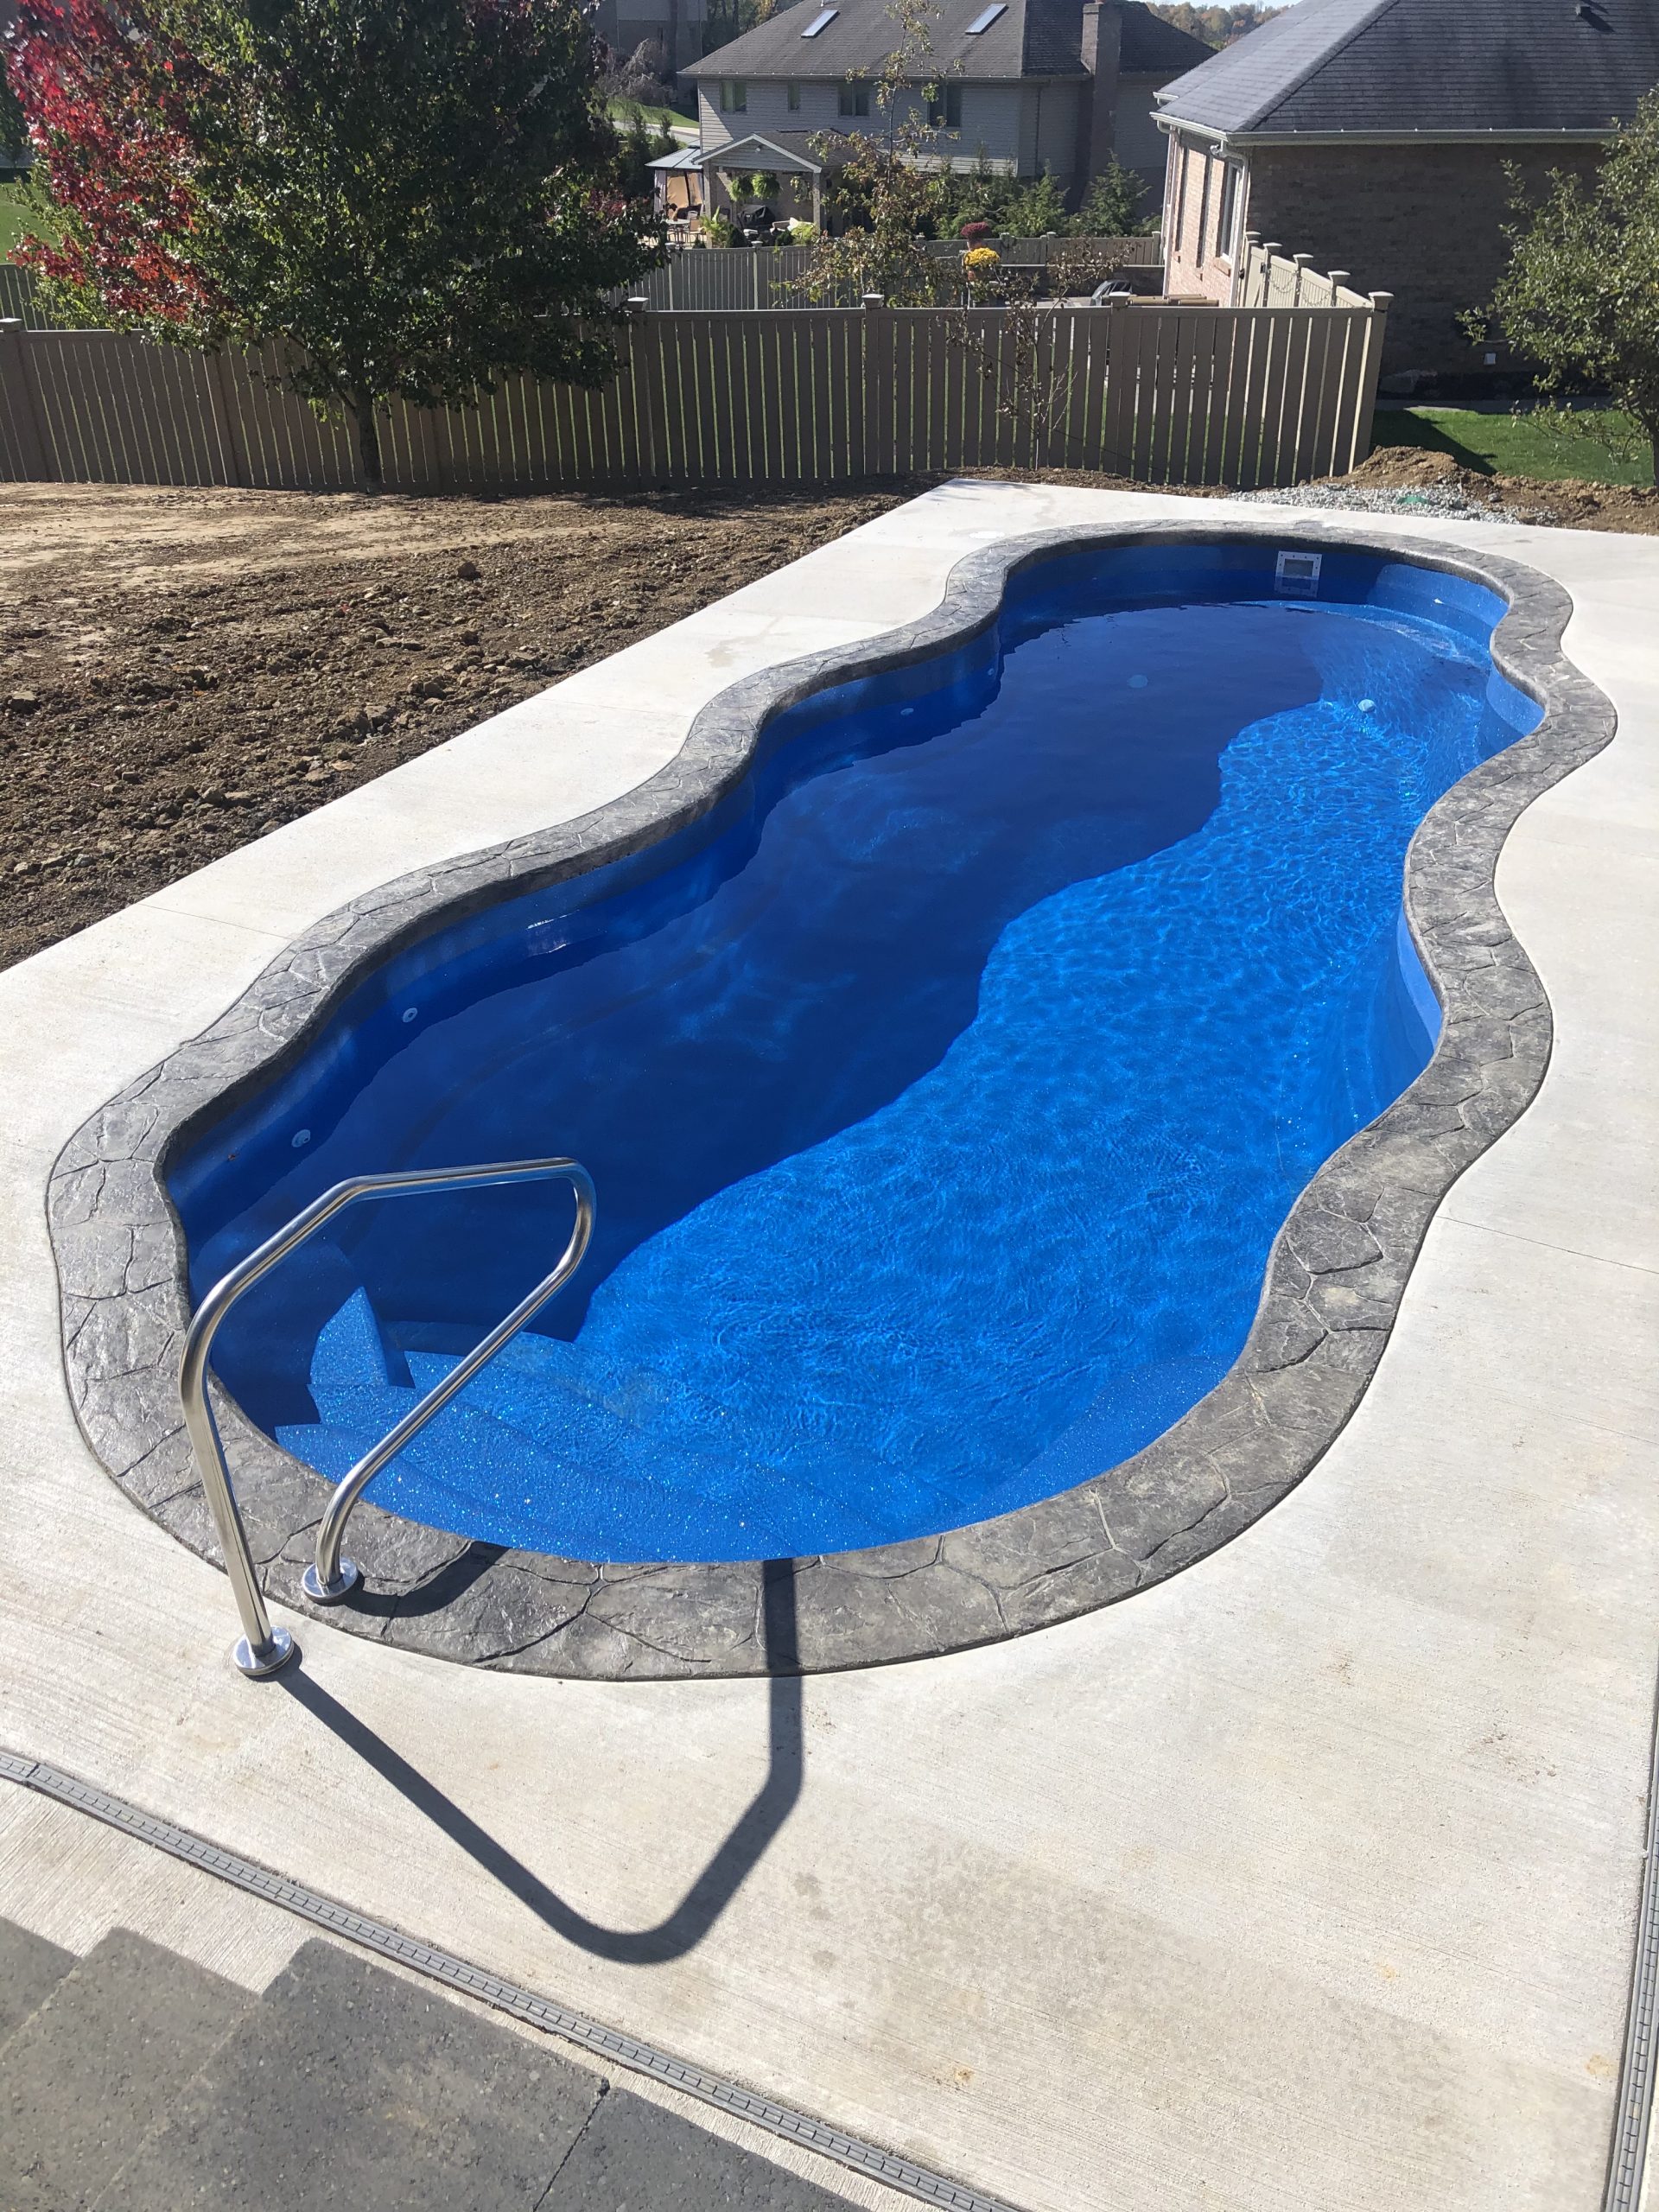 Credible Pools Year Round Pool